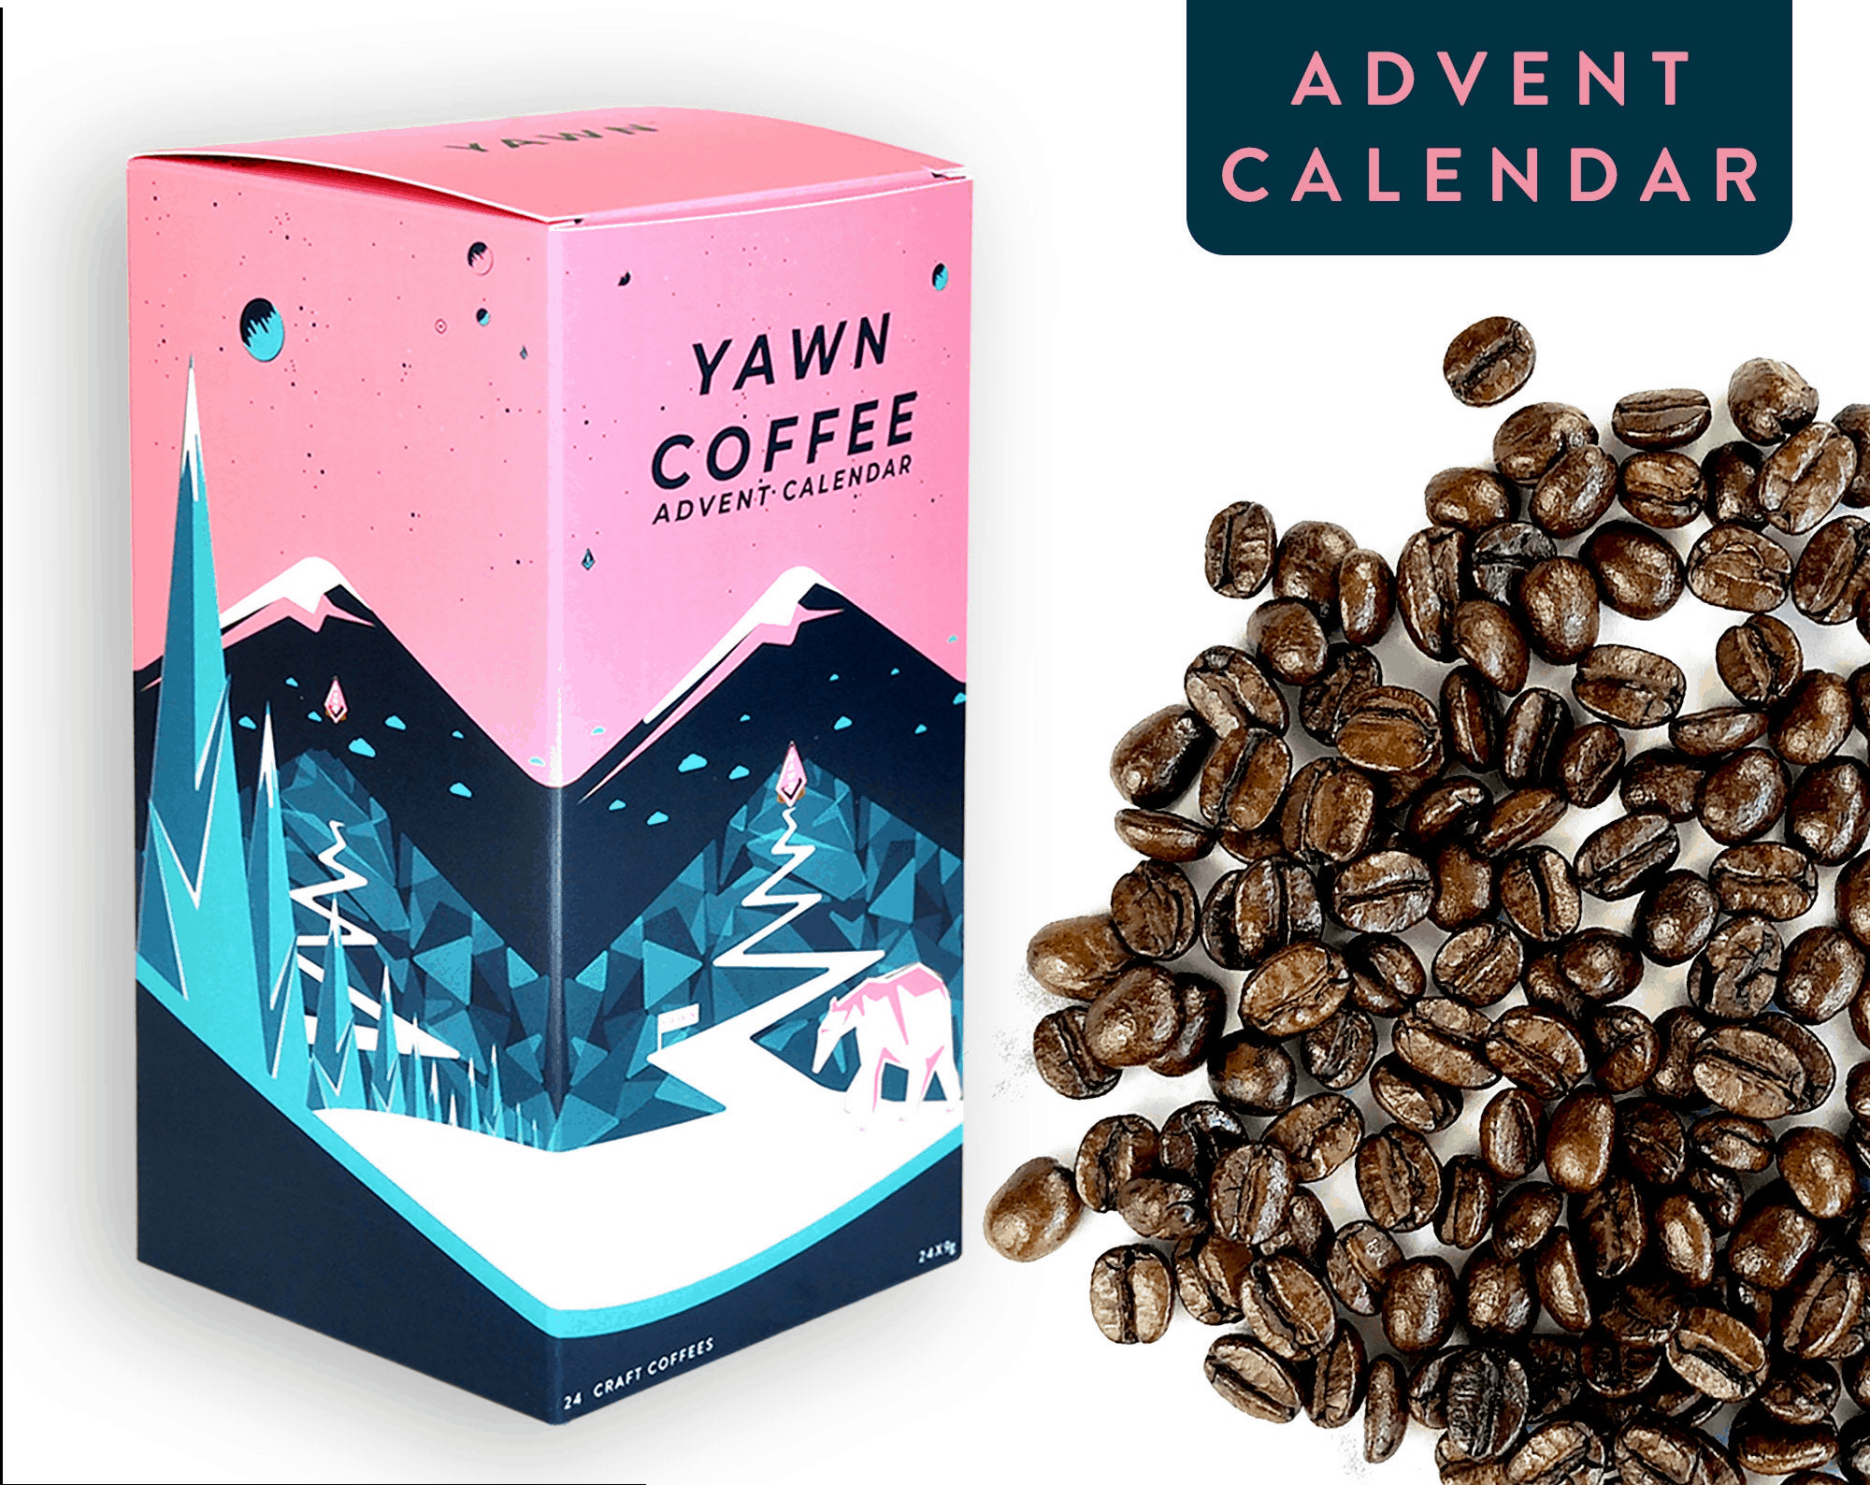 Yawn Coffee Advent Calendar Reviews Get All The Details At Hello